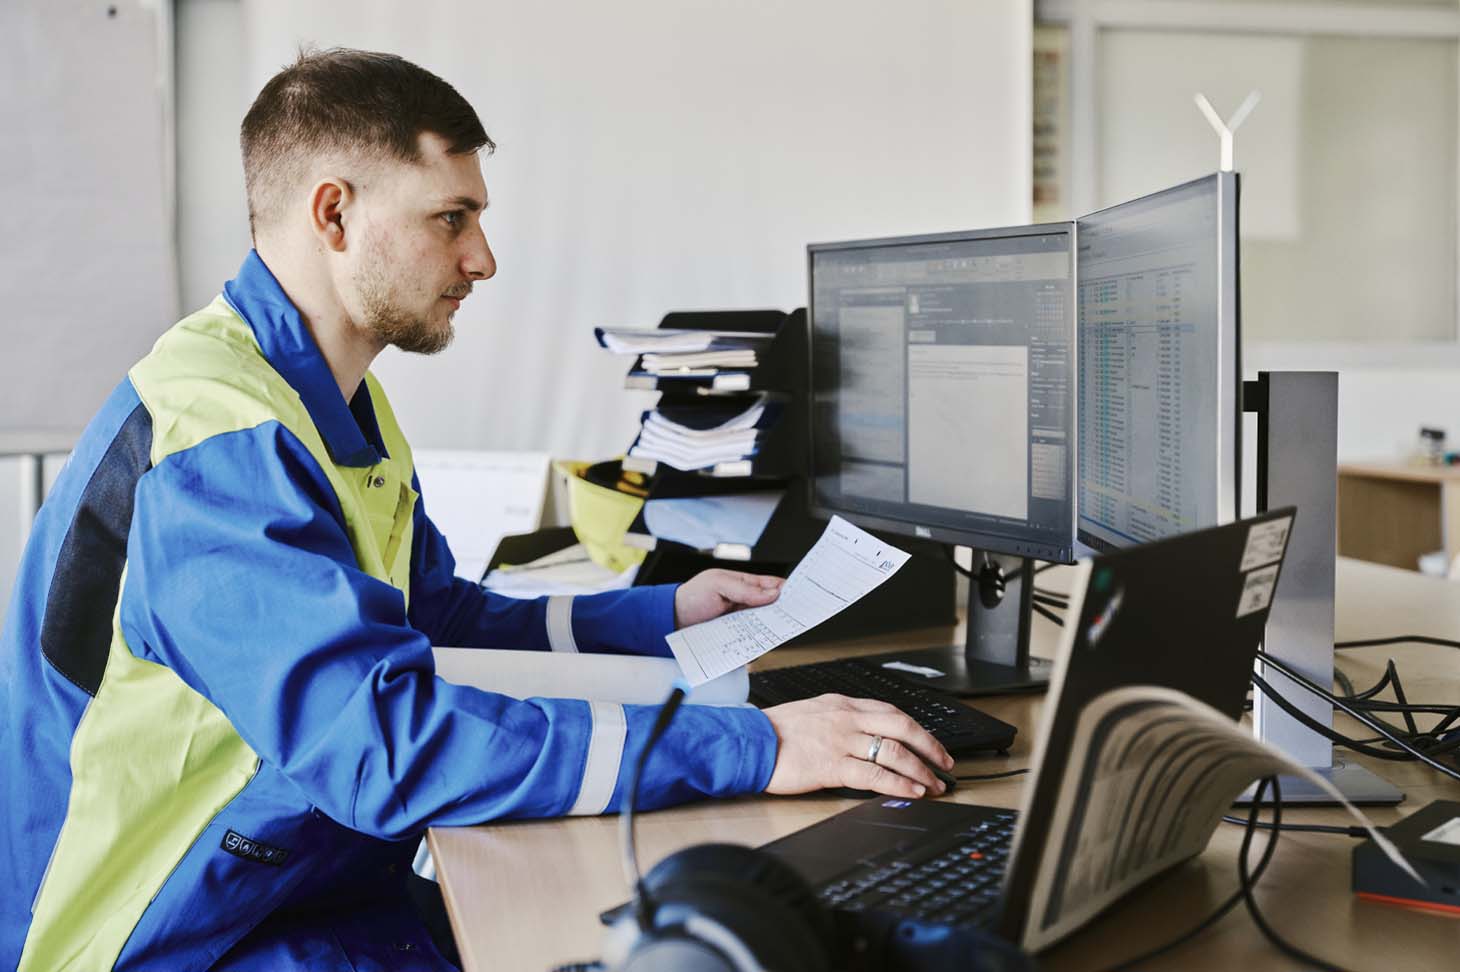 voestalpine employee Thomas working at his desk in front of two screens